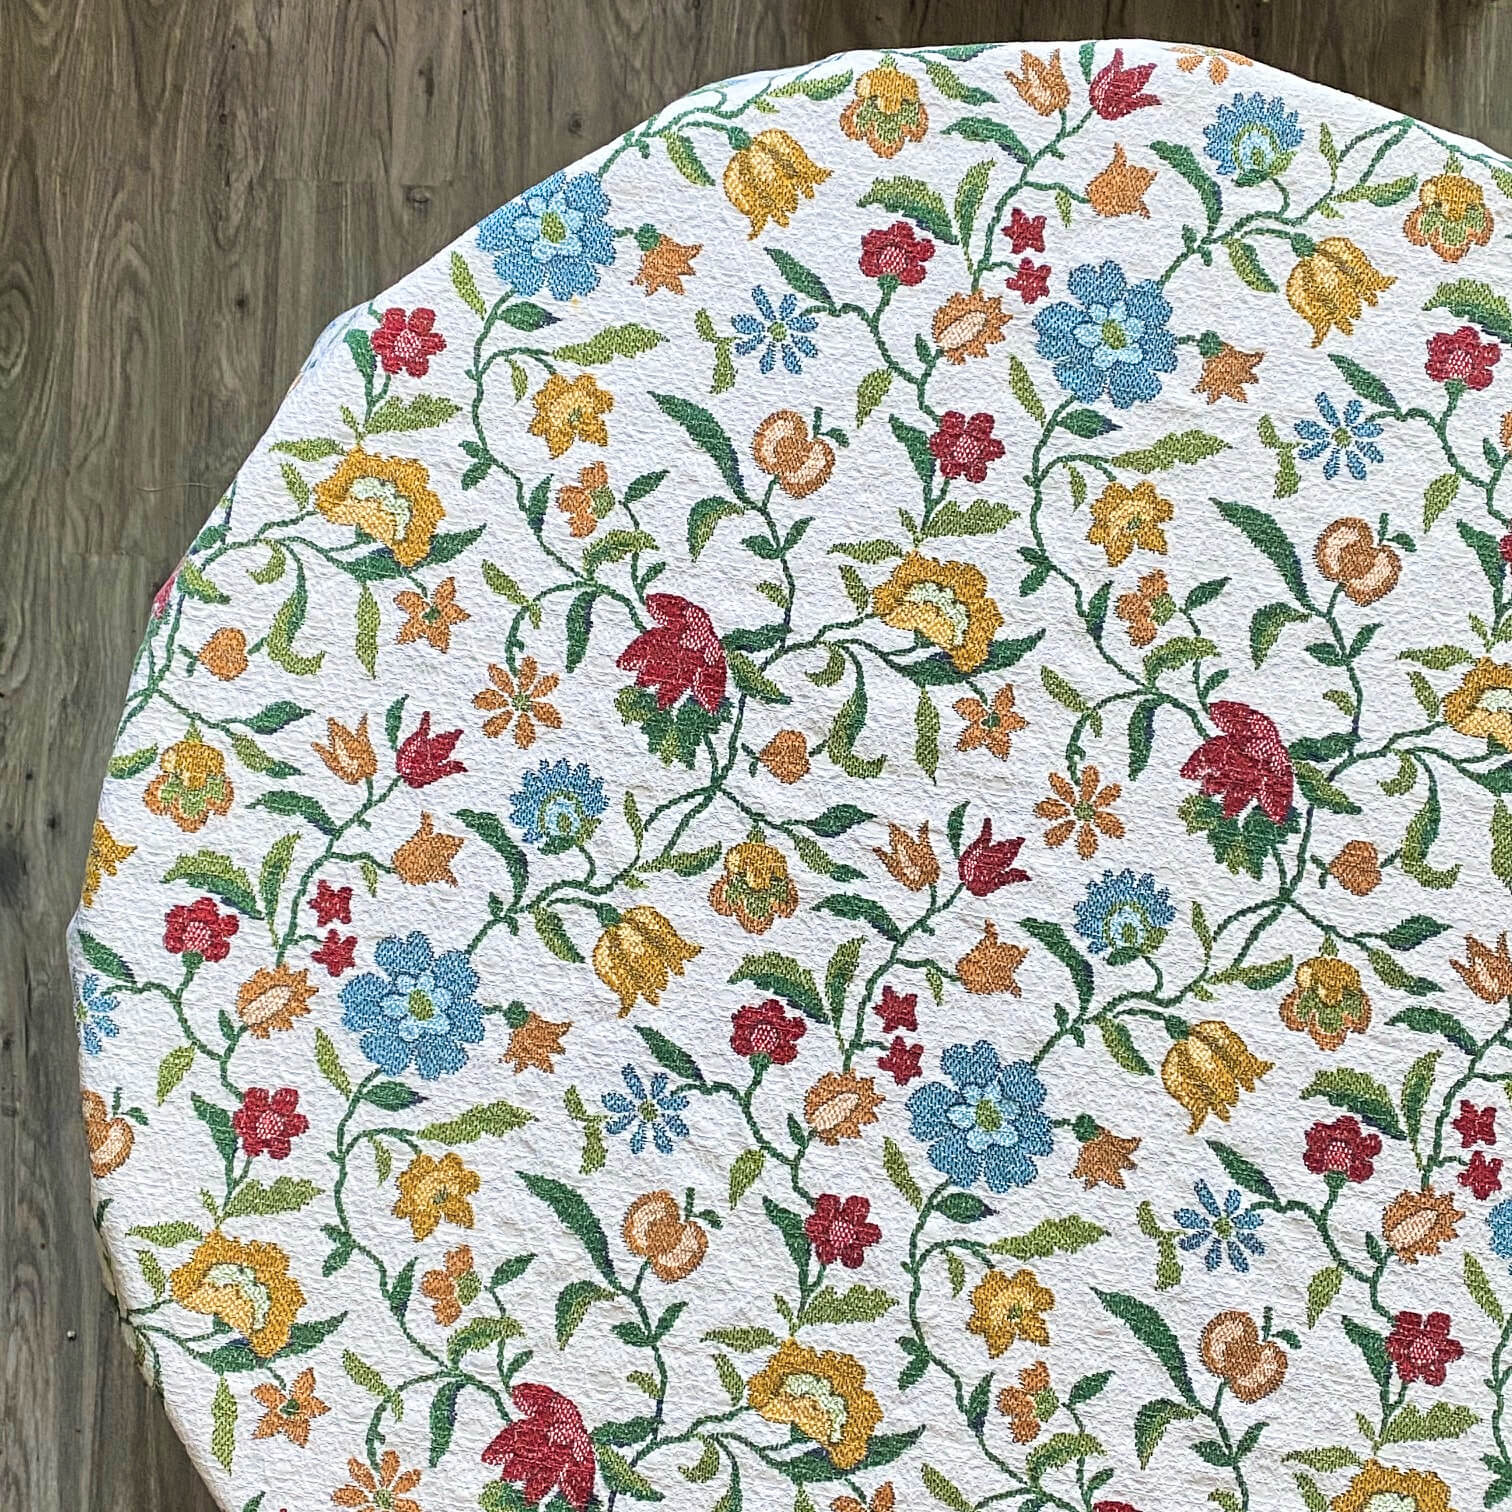 Vintage Round Floral Tablecloth Picnic Blanket - Red Blue Yellow Flowers - 64" inches